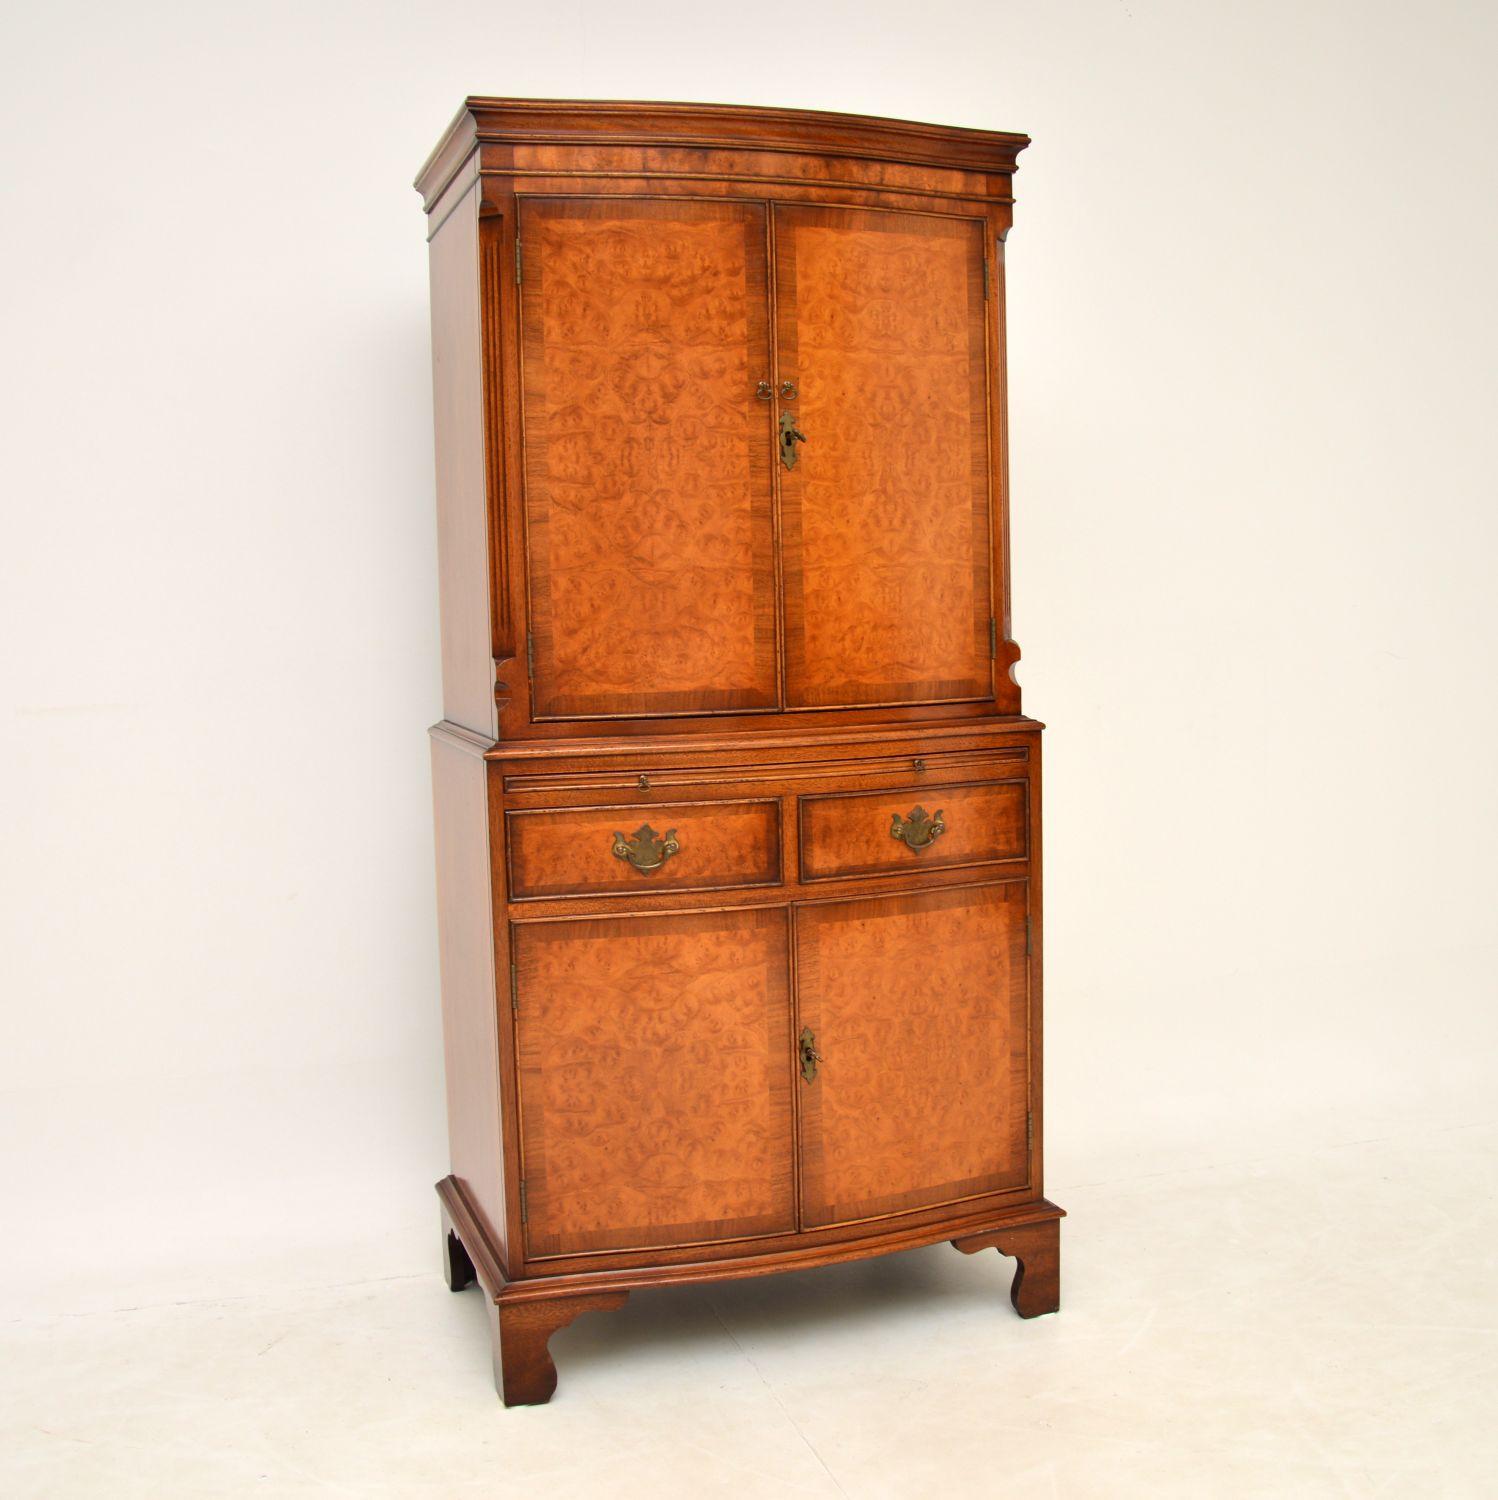 A very well made burr walnut cupboard on cupboard, in the antique Georgian style. This was made in England & dates from around the 1950’s period.

It is of excellent quality, with stunning burr walnut grain patterns and of a very solid build. The